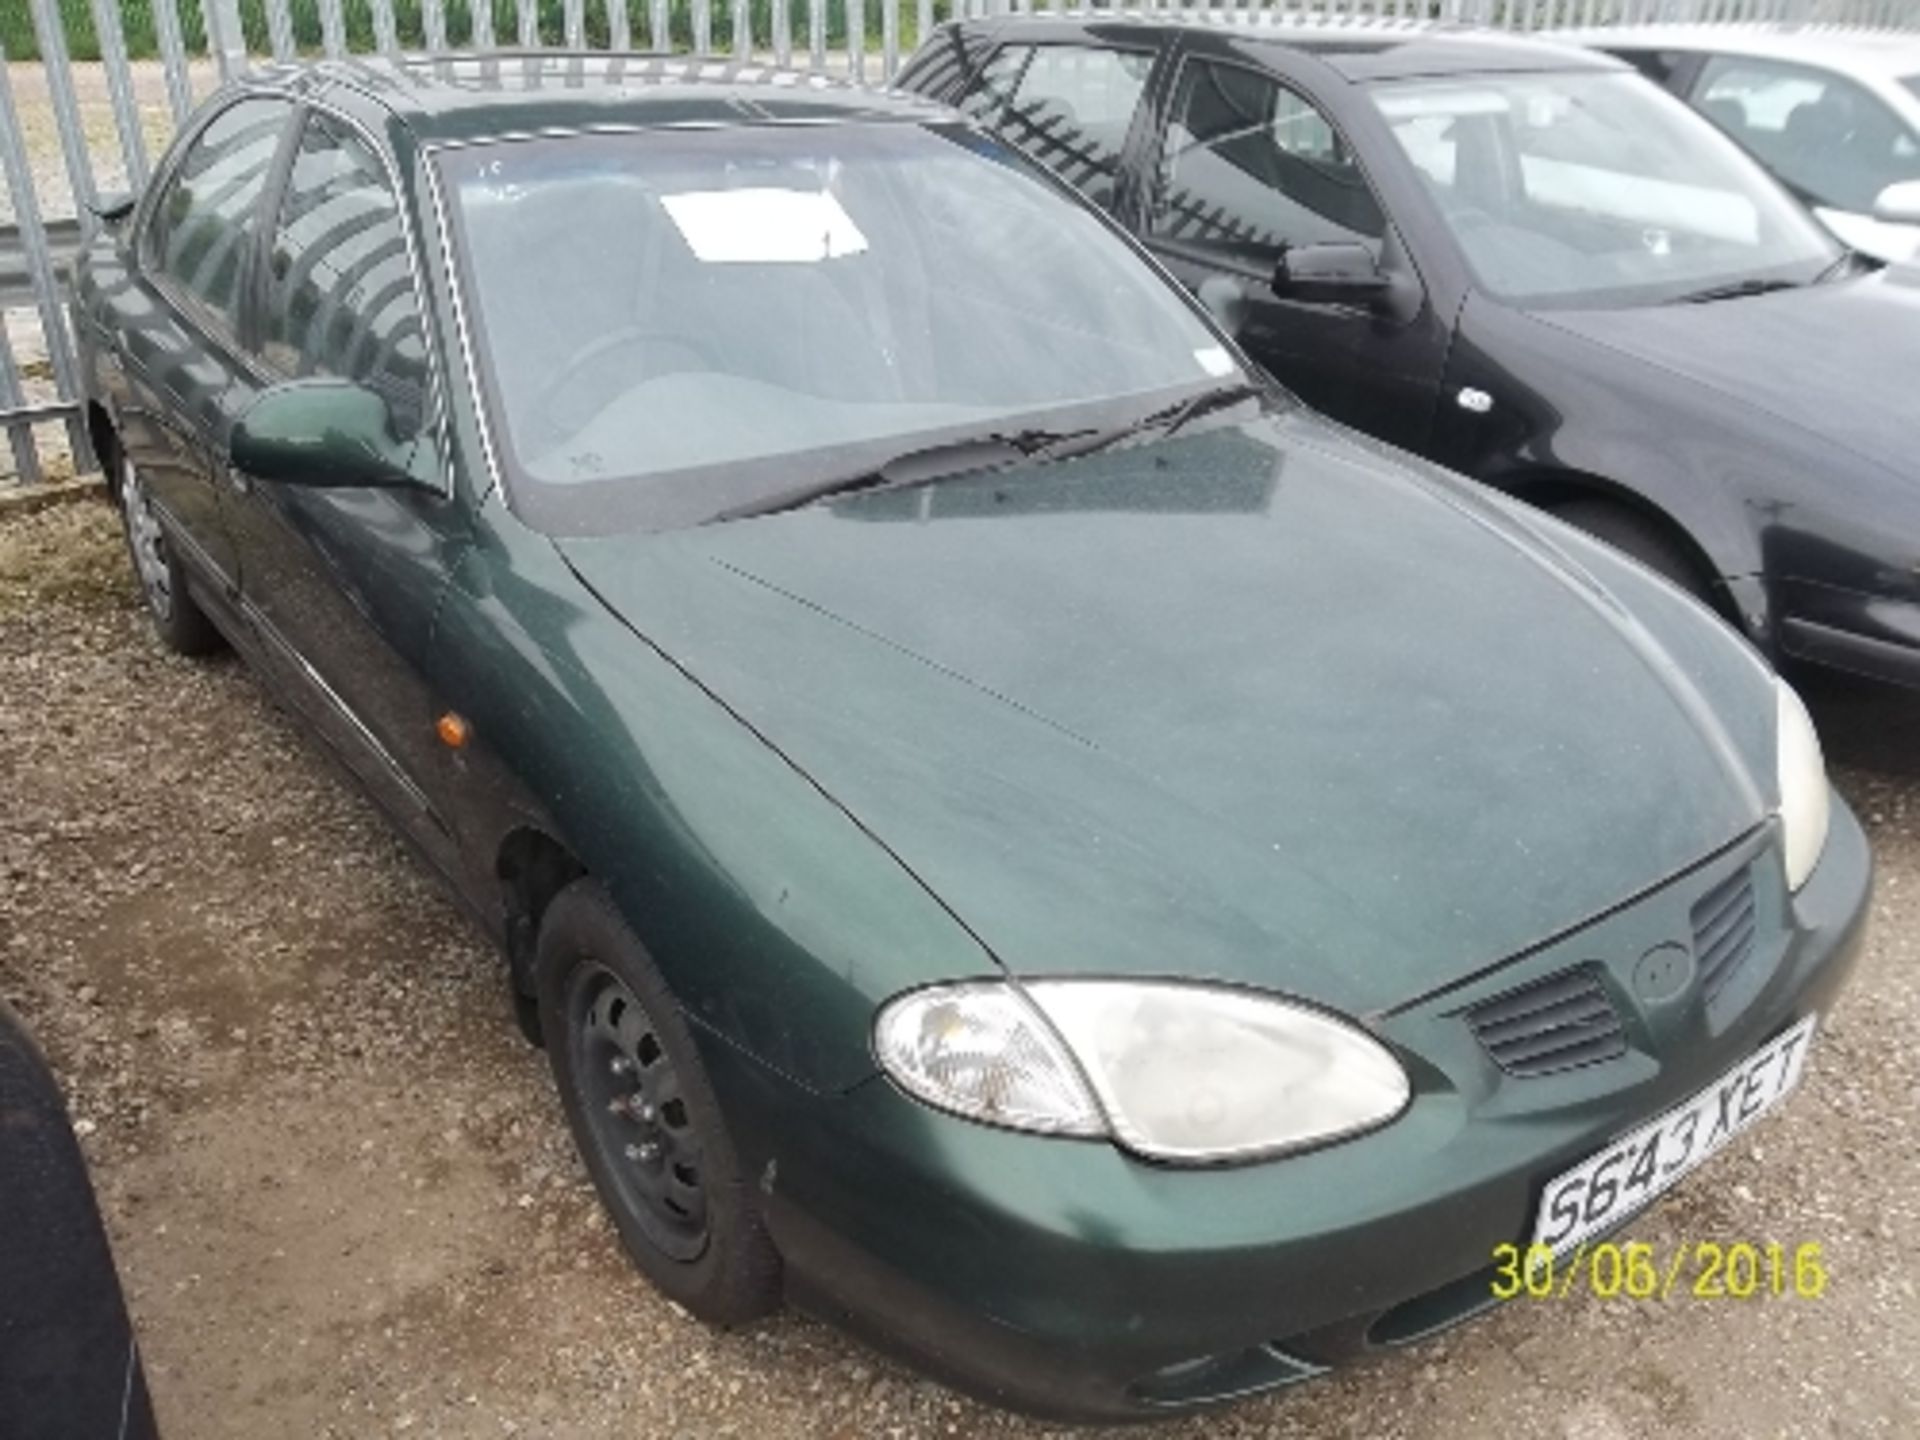 Hyundai Lantra GSI - S643 XETDate of registration: 24.12.19981599cc, petrol, automatic, - Image 2 of 4